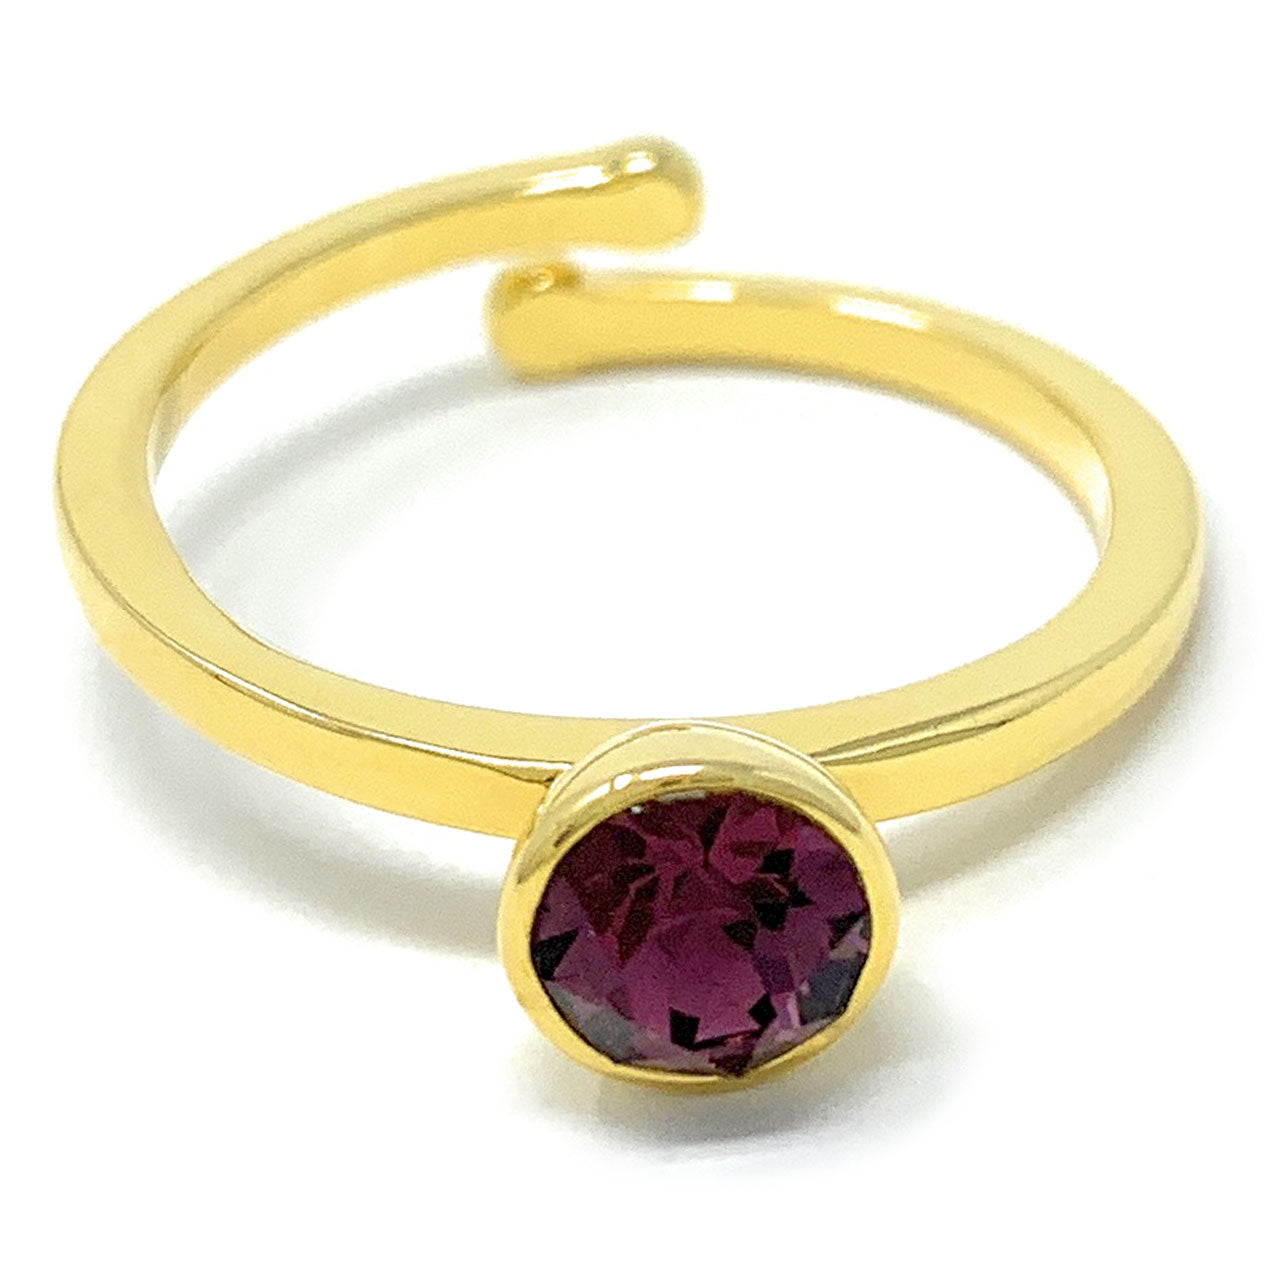 Harley Adjustable Ring with Purple Amethyst Round Crystals from Swarovski Gold Plated - Ed Heart